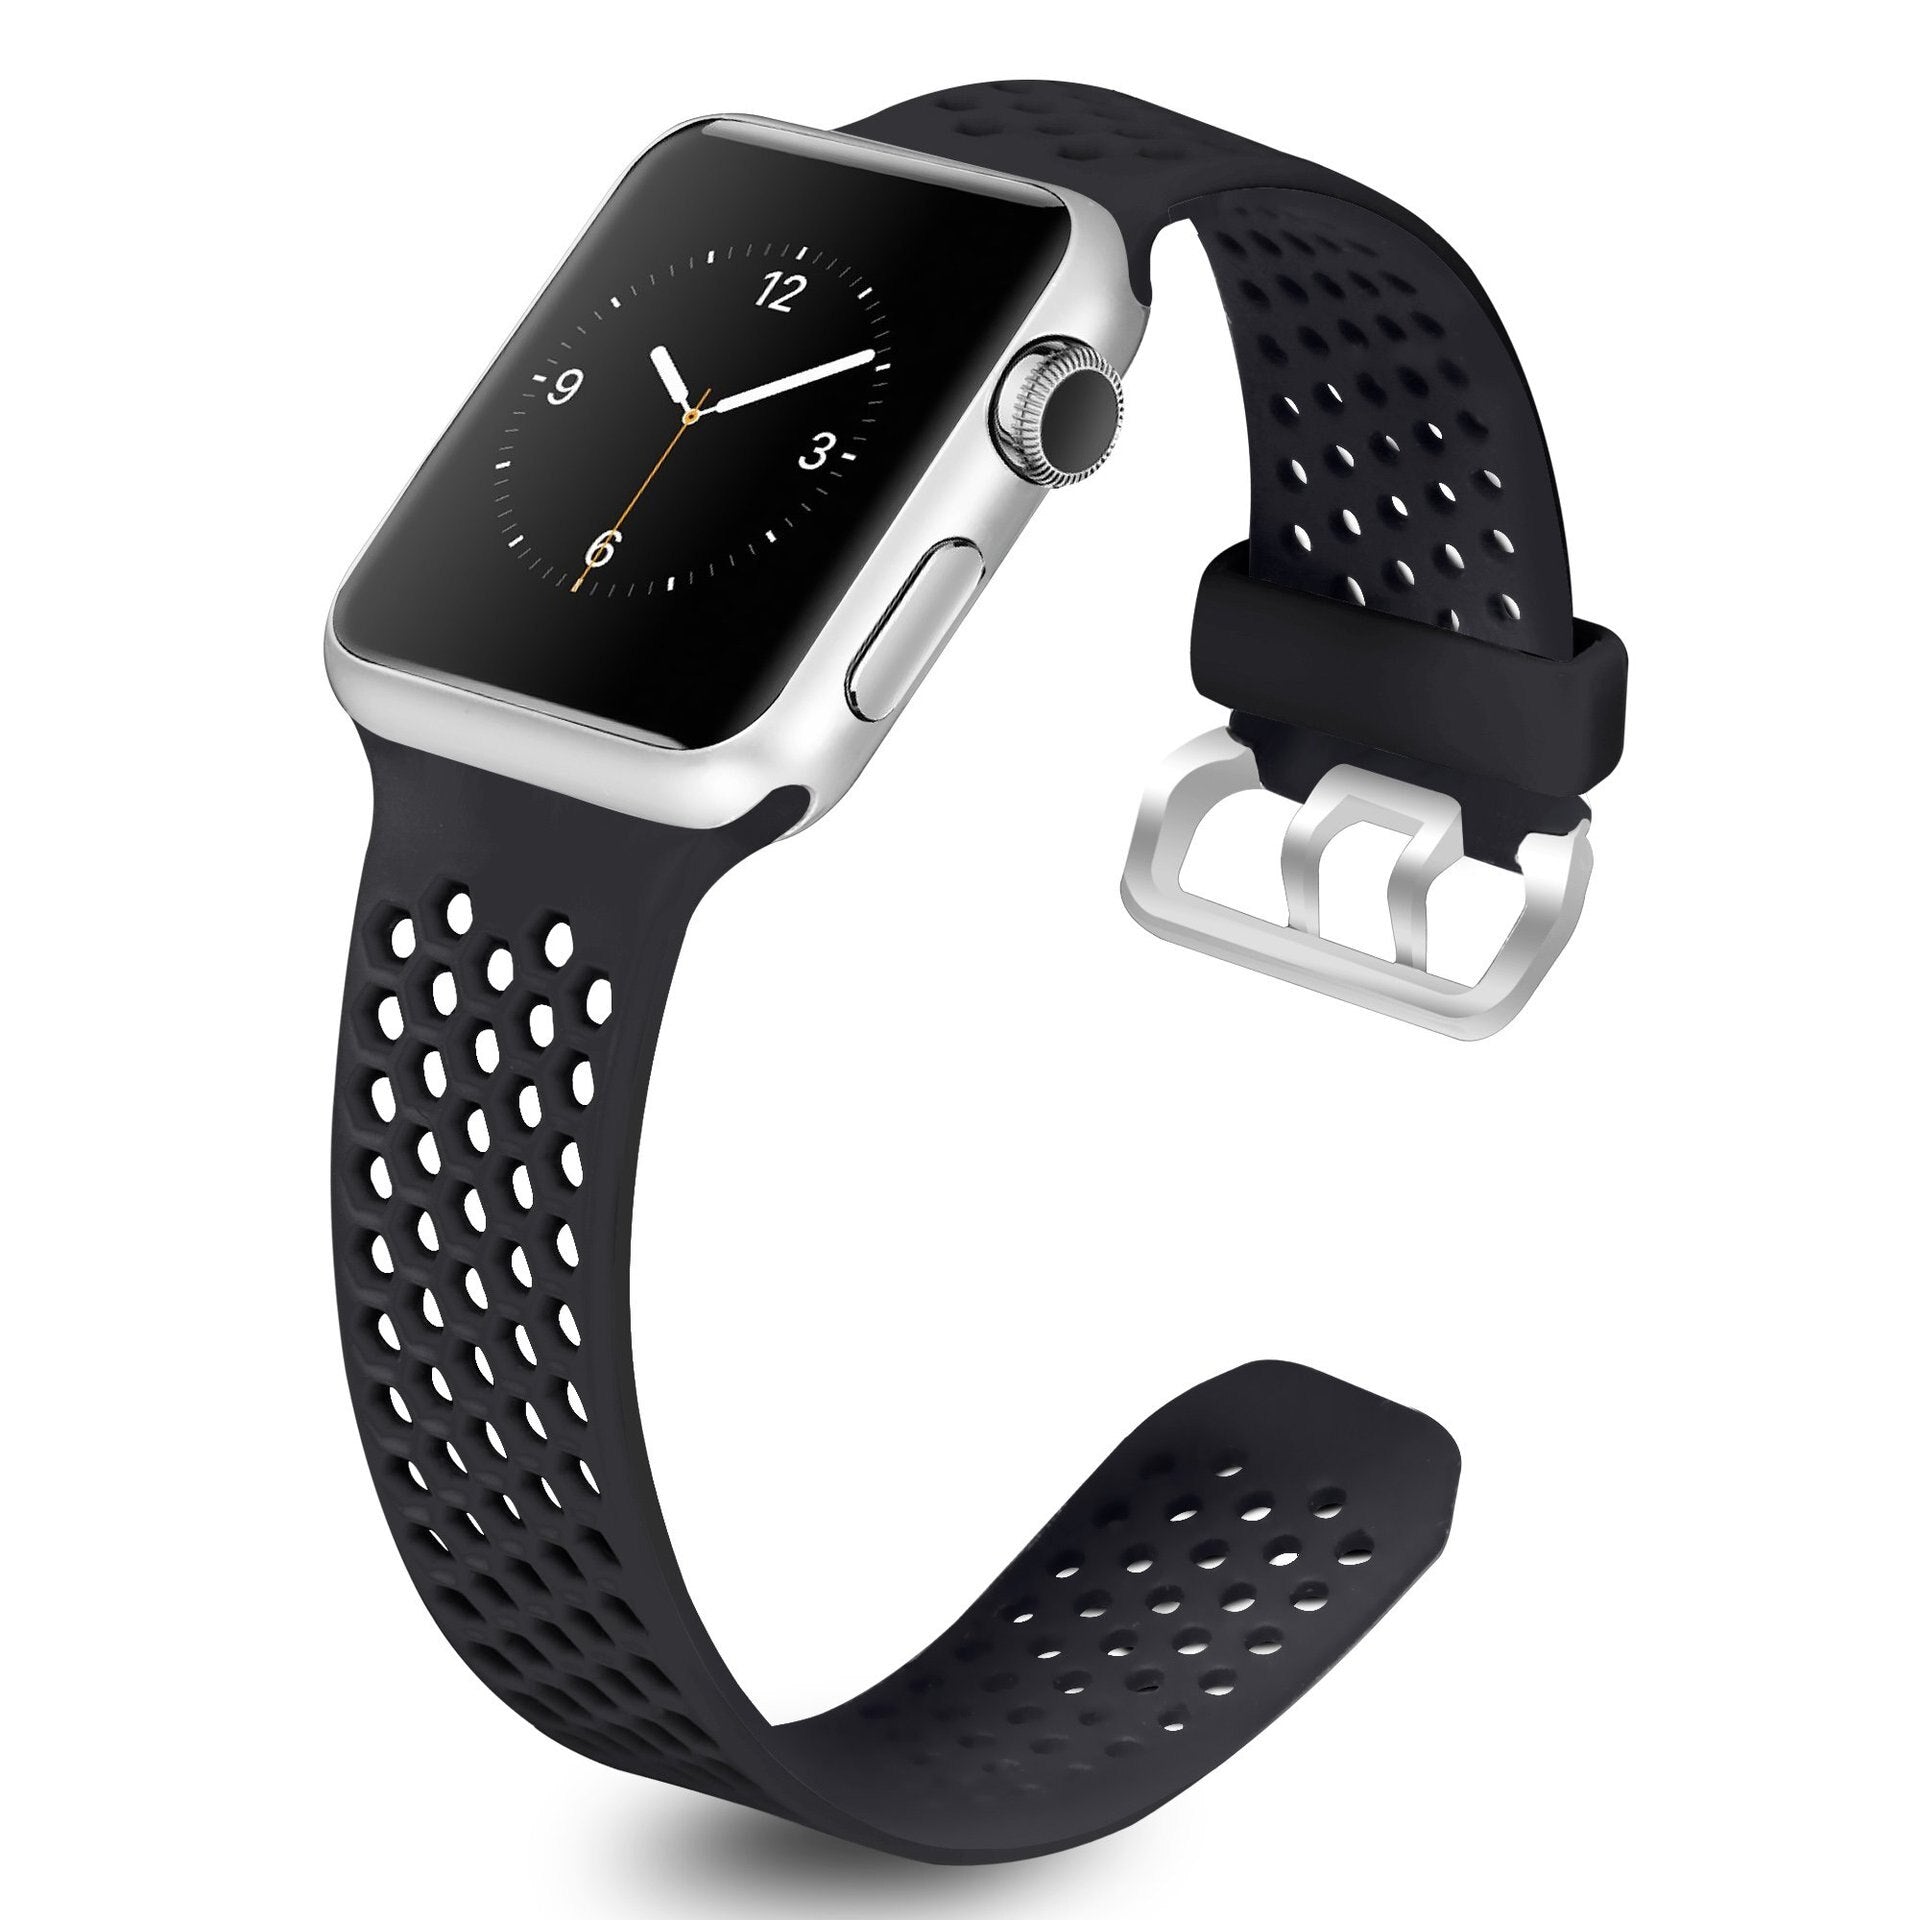 Strap for Apple Watch 5 Band 40mm 44mm iWatch series 4 5 6 SE Sport Belt Silicone bracelet for Apple watch band 42mm 38mm - 200000127 United States / black / 38 or 40 mm Find Epic Store